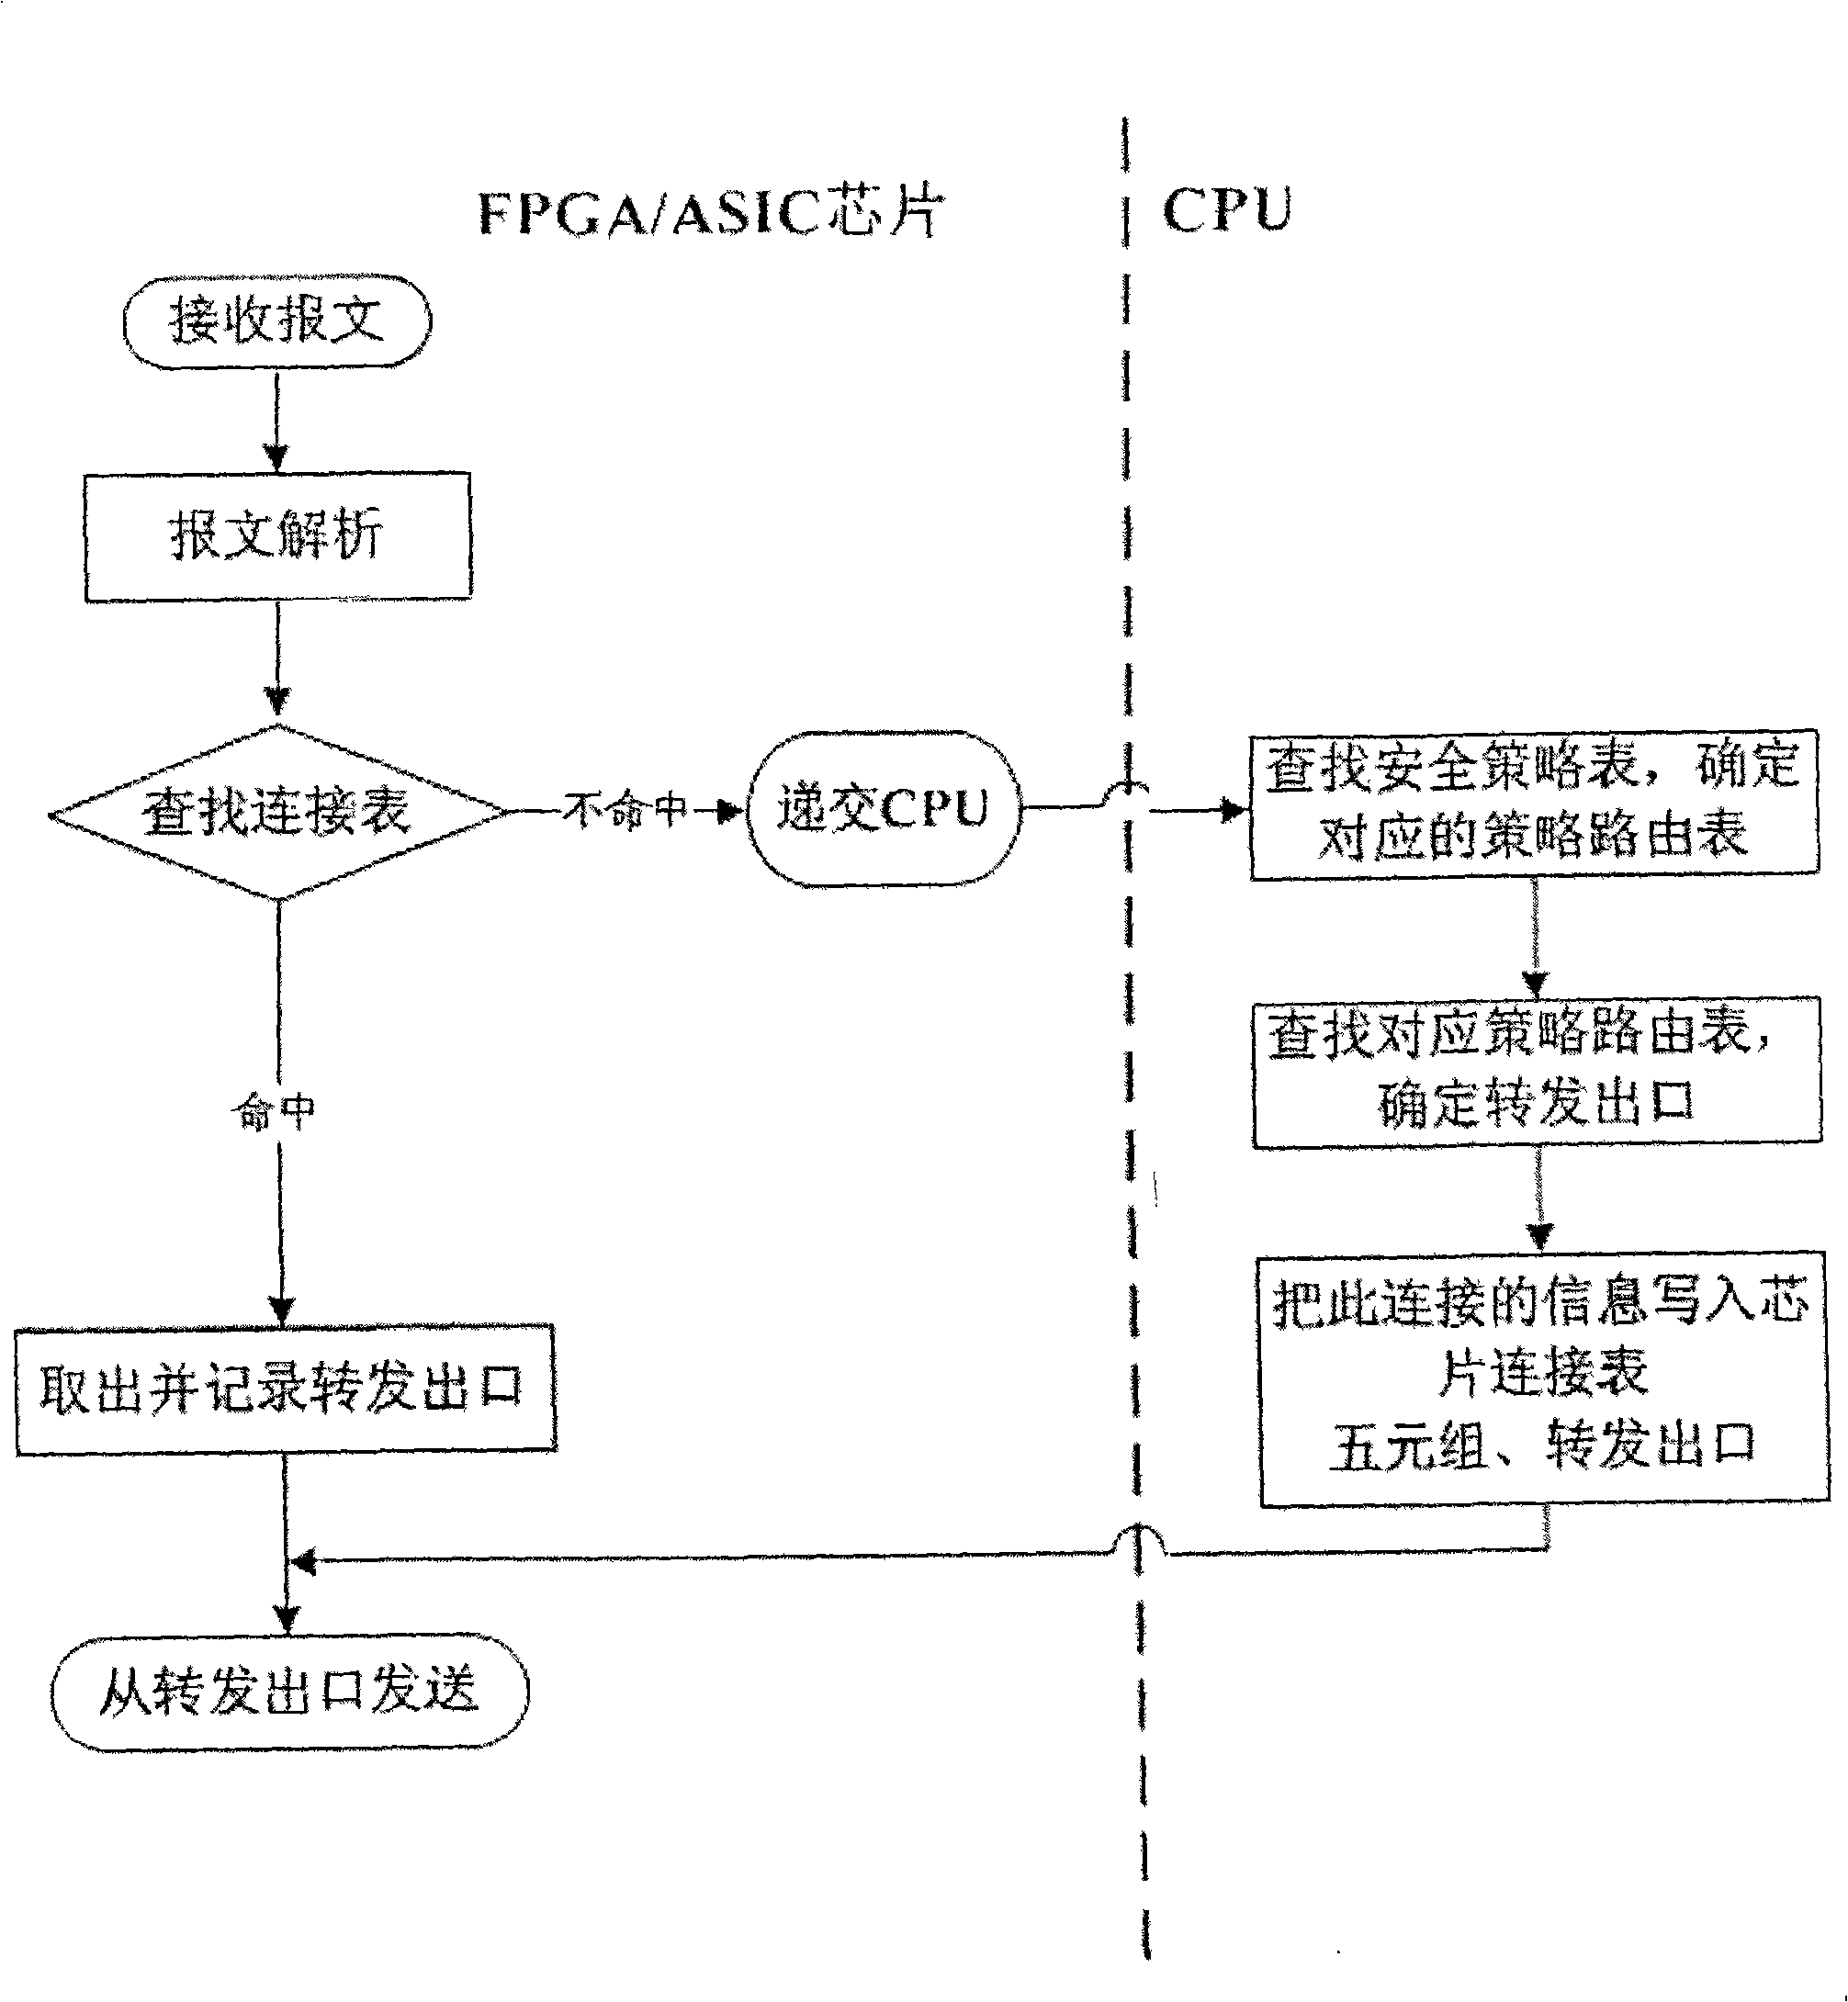 Method for chip internal link list supporting policy routing